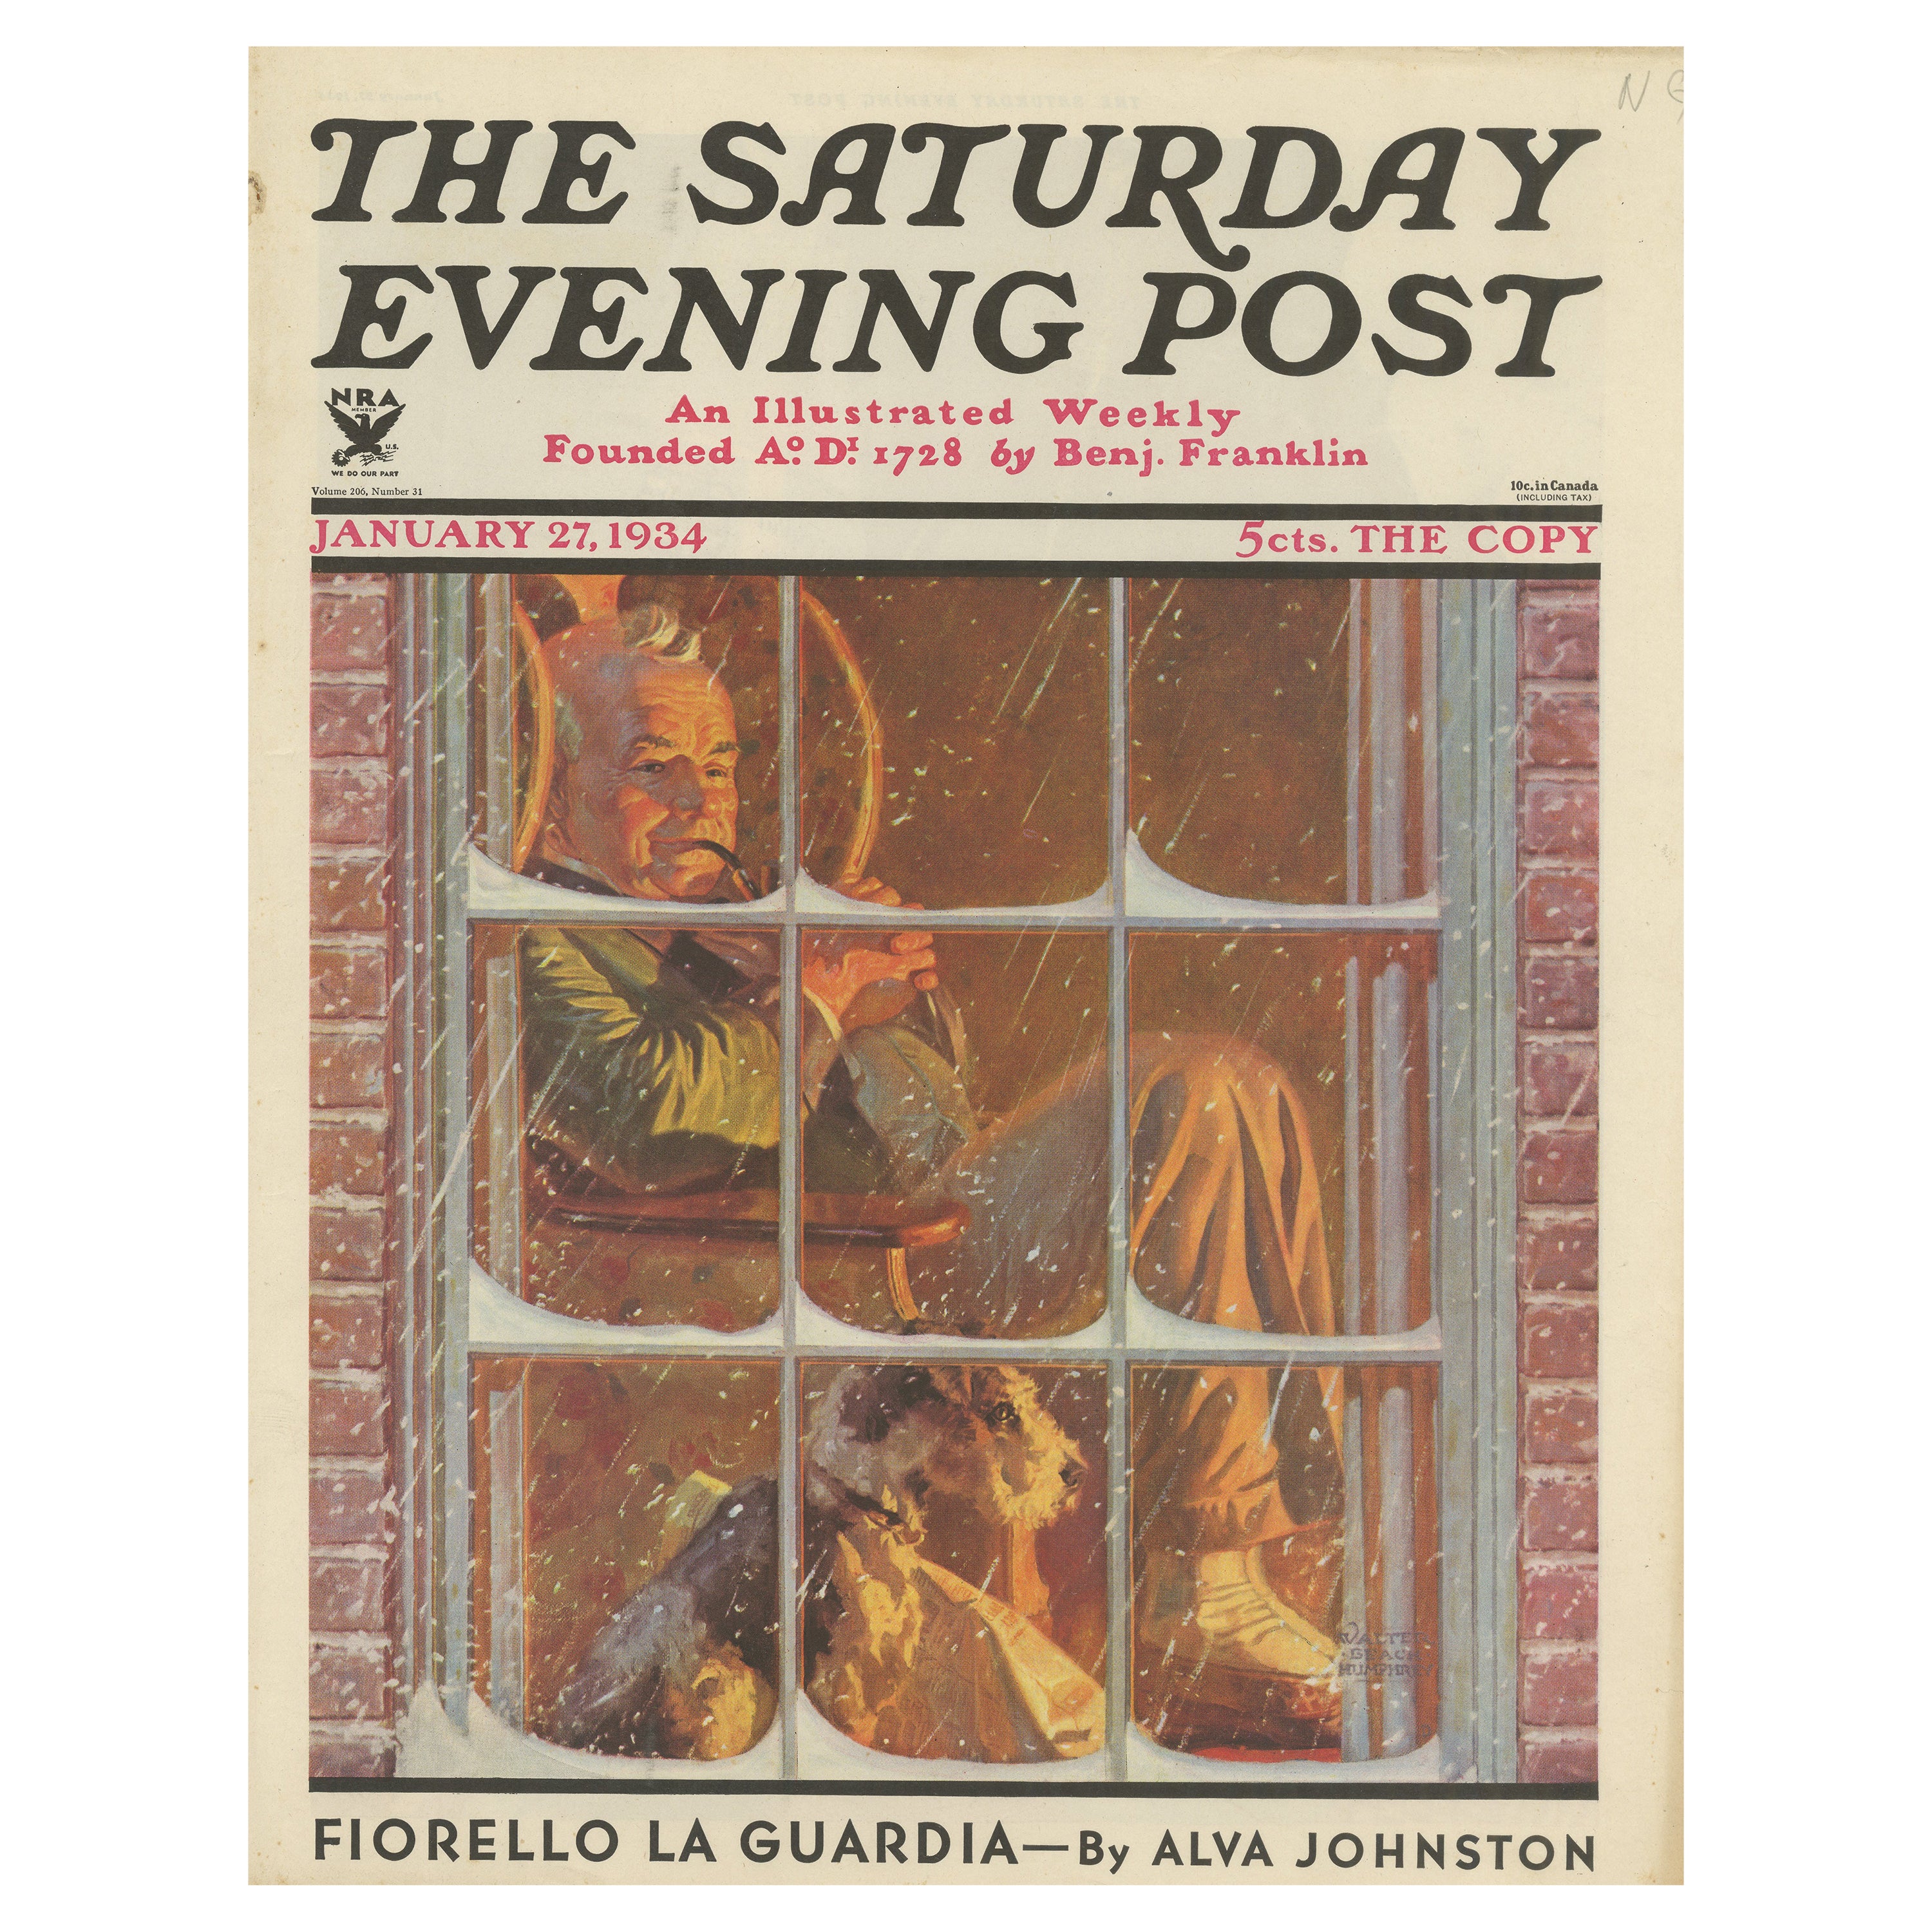 Vintage Print of a Man and Dog Sitting by the Fire 'The Saturday Evening Post'